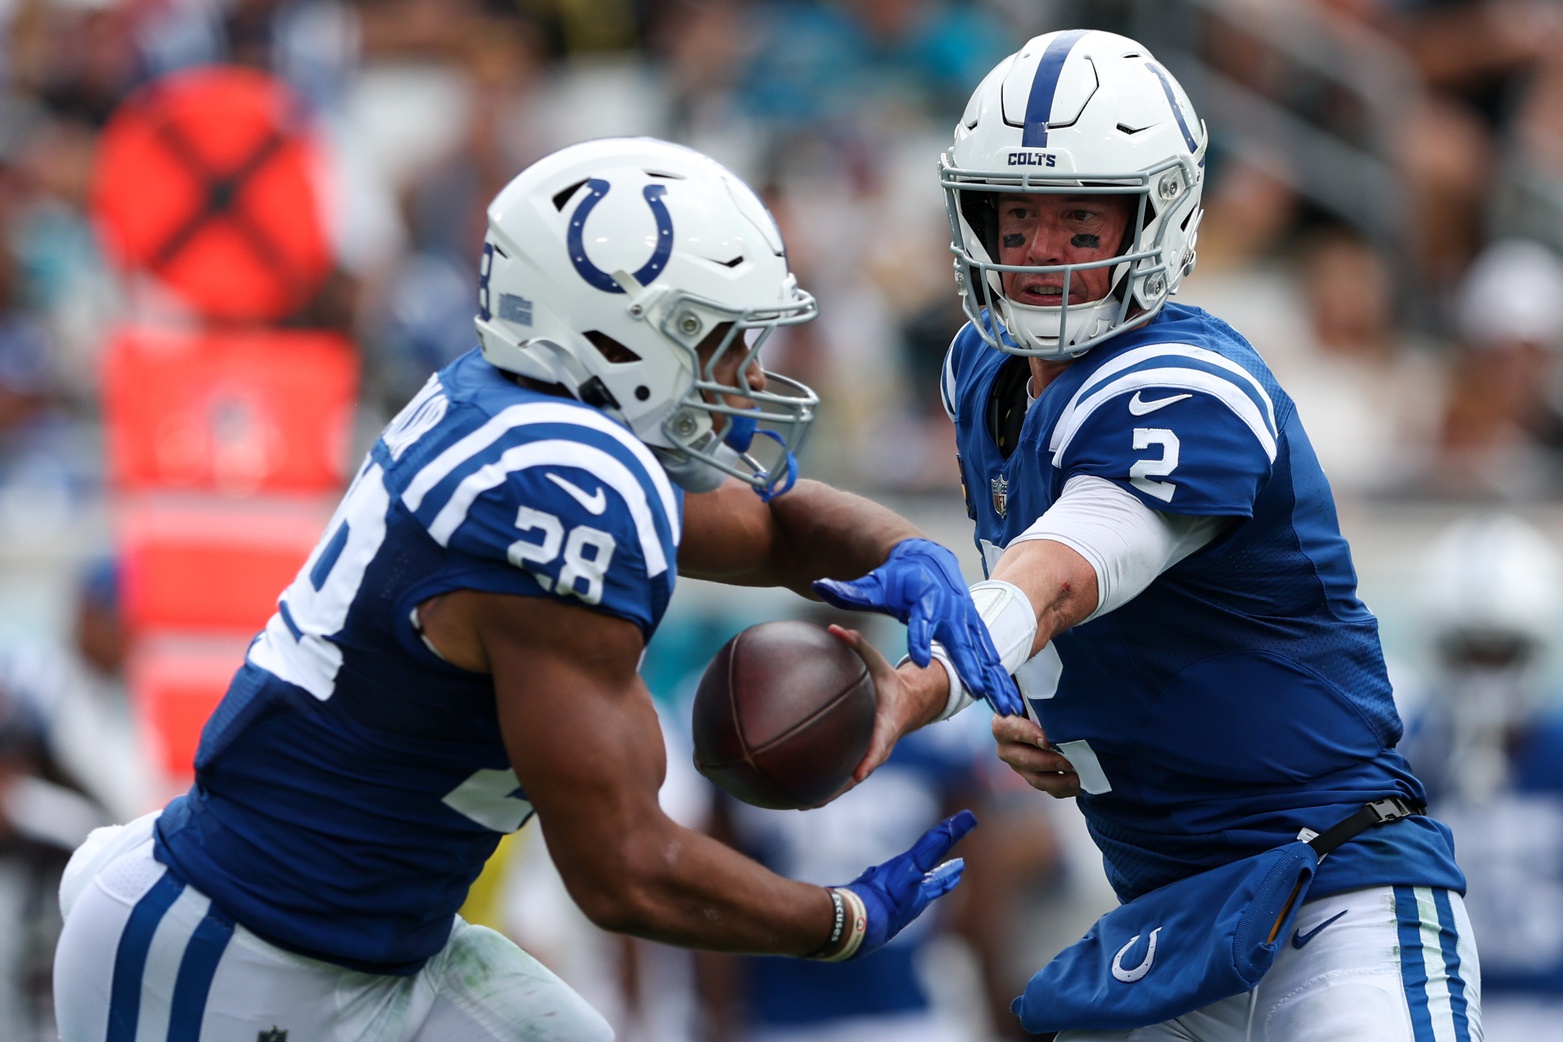 Colts vs. Broncos Week 5 Preview and Prediction